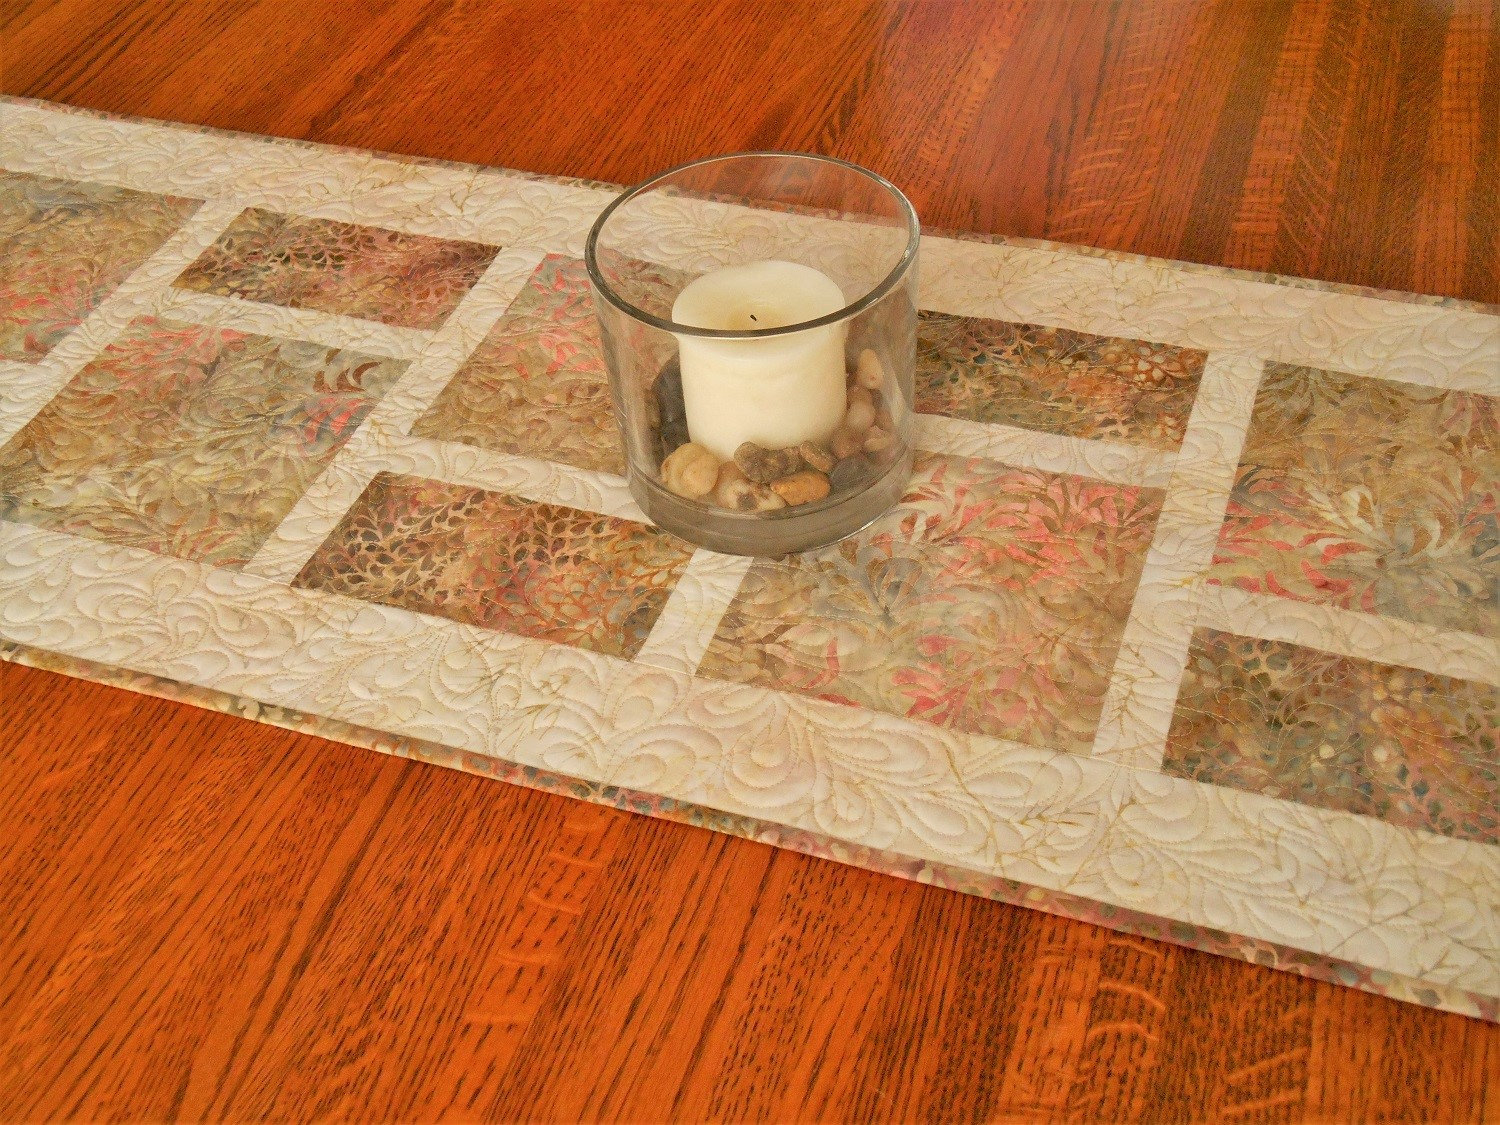 Modern Quilted Table Runner In Neutral Colors With Peach Gray Etsy